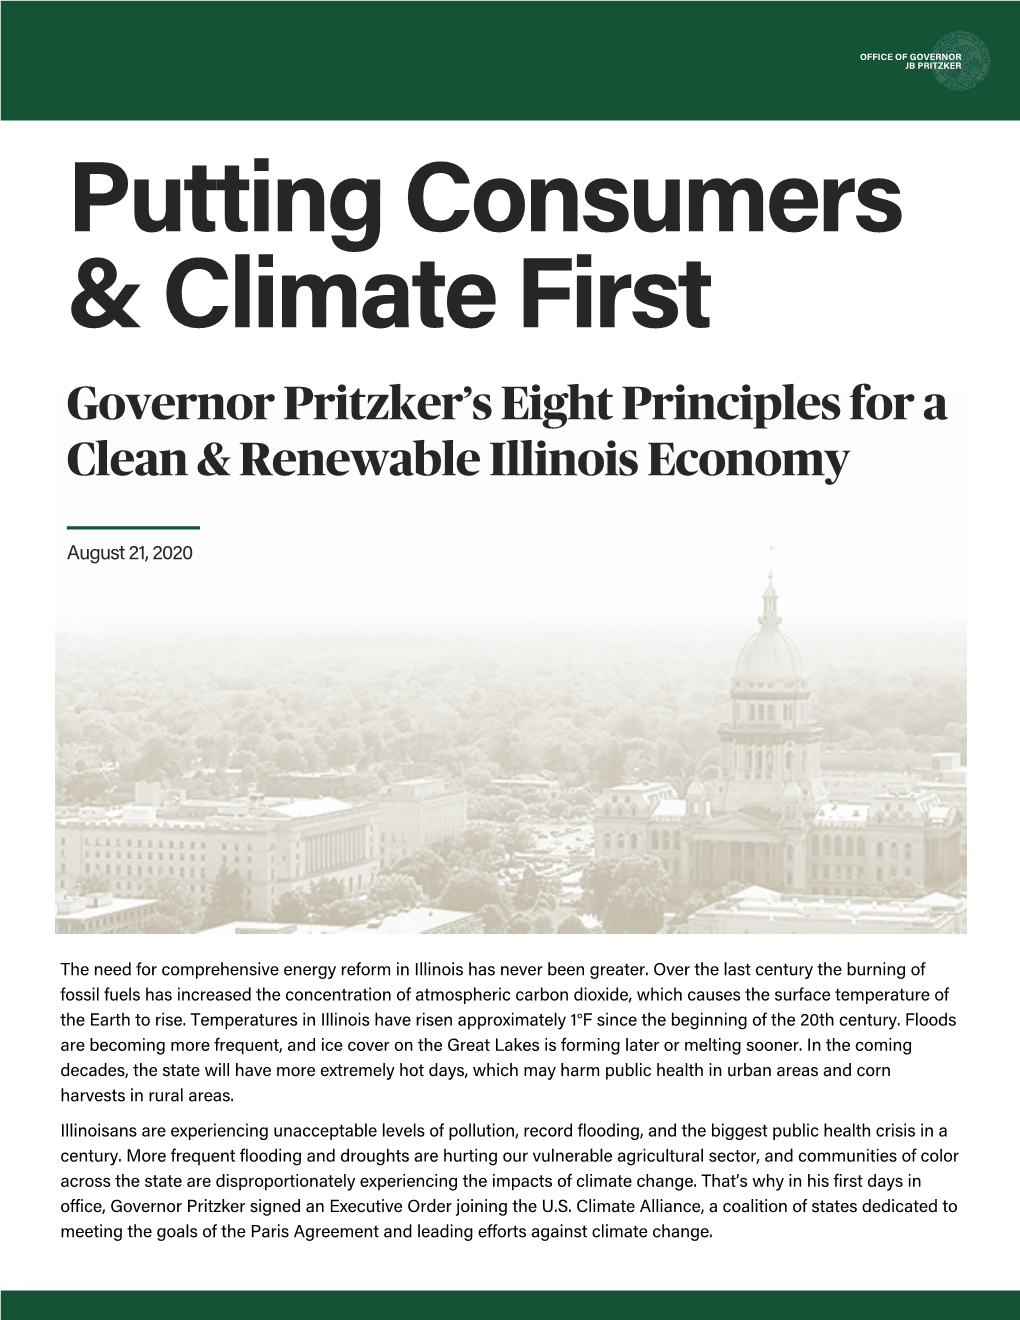 Putting Consumers & Climate First: Governor Pritzker's Eight Principles